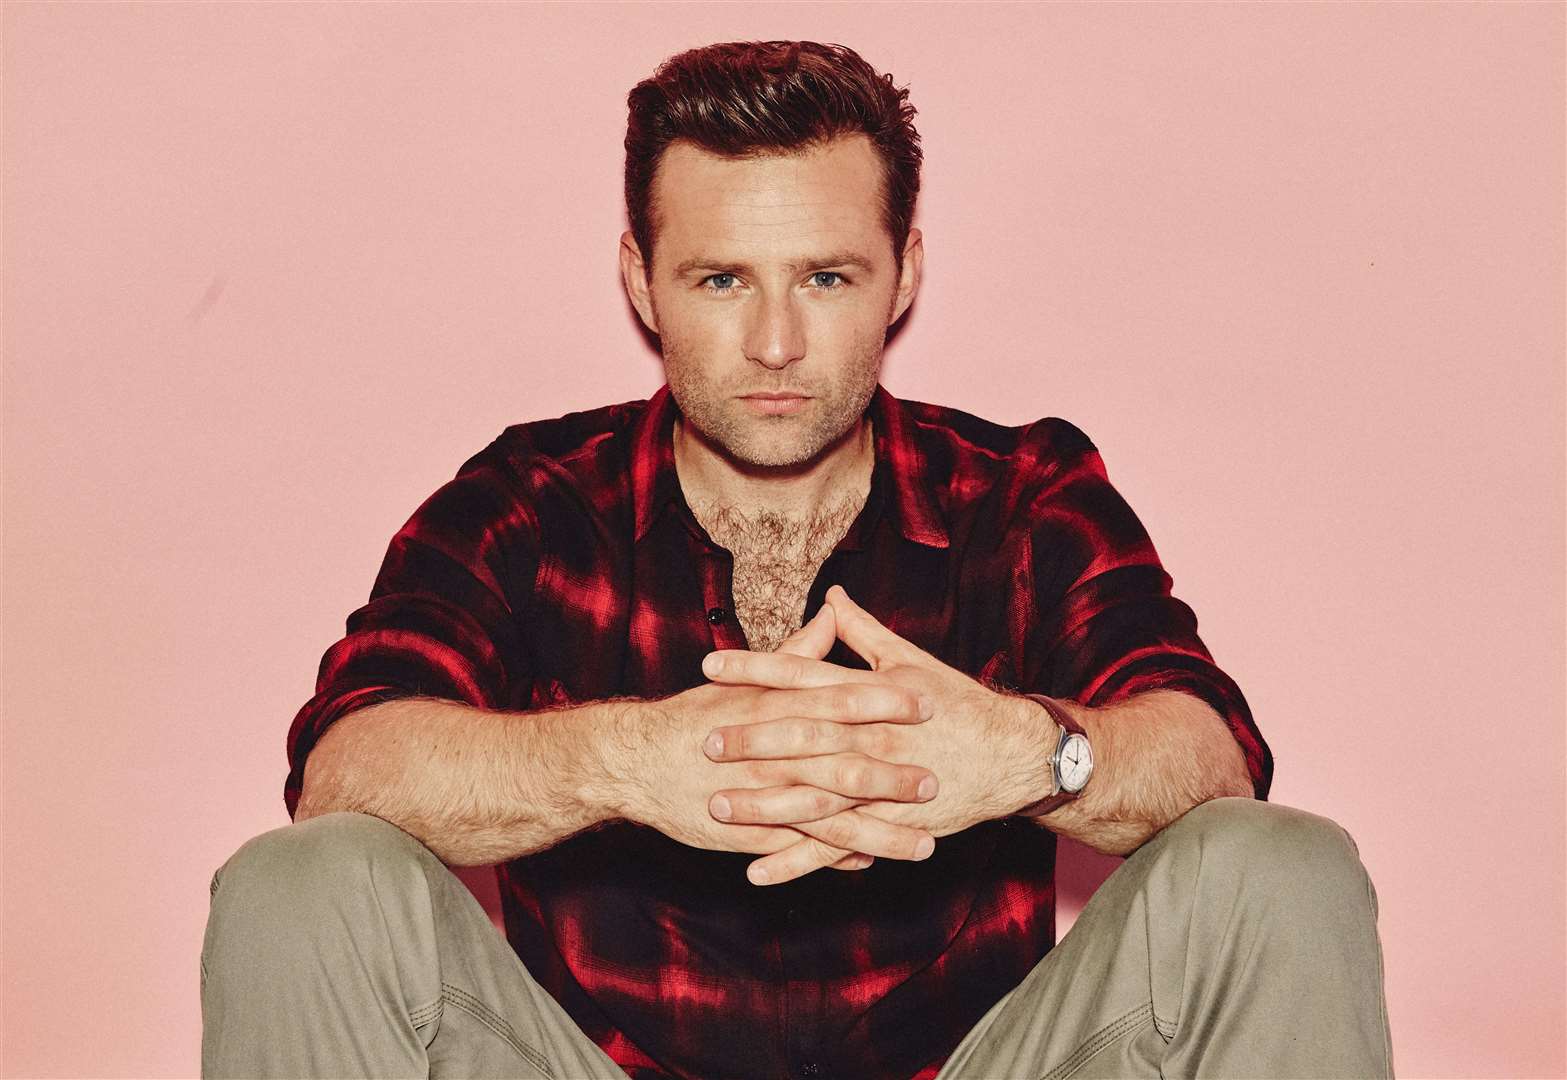 McFly drummer Harry Judd will be stepping on stage for a guest role in Friendsical at the Orchard Theatre in Dartford. Picture: Supplied by the Orchard Theatre